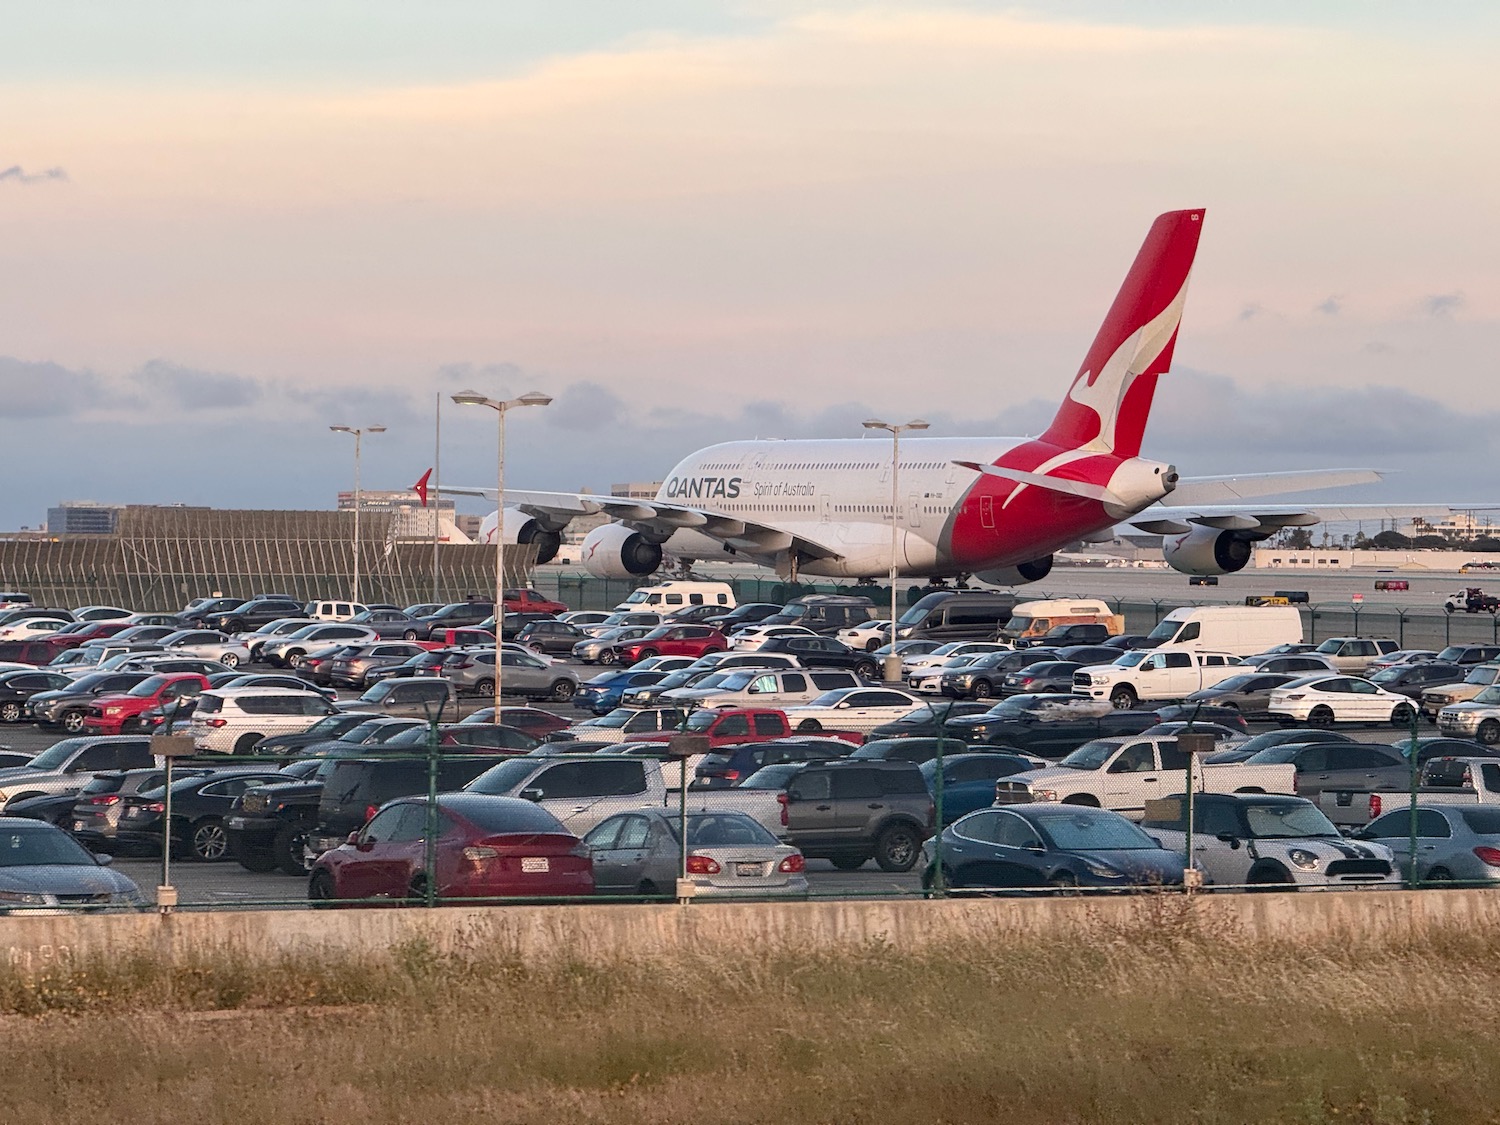 a large airplane in a parking lot with cars